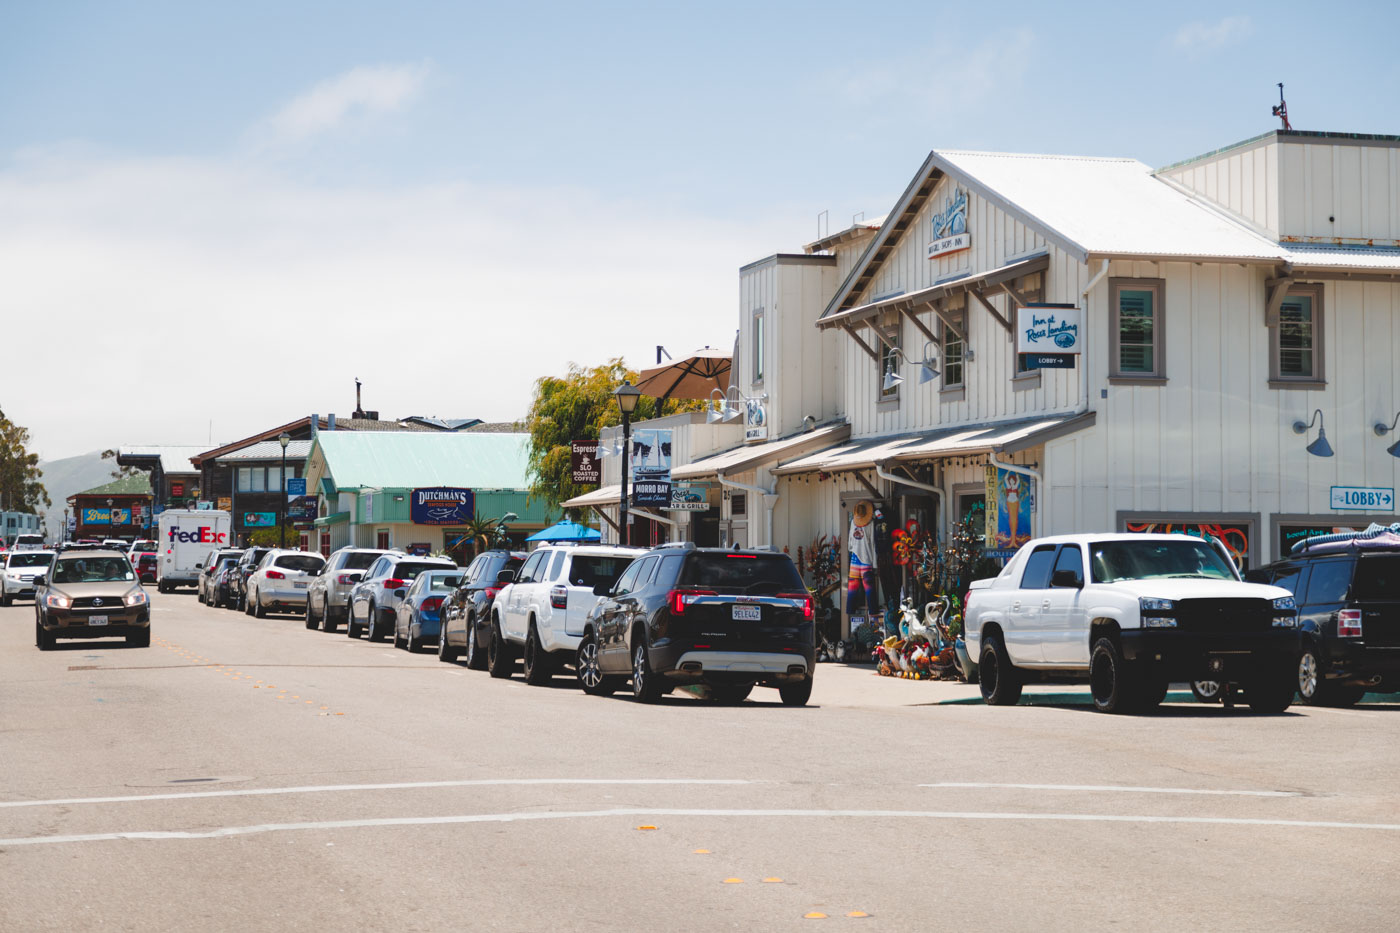 Cars parked along the main road through Morro Bay Town.